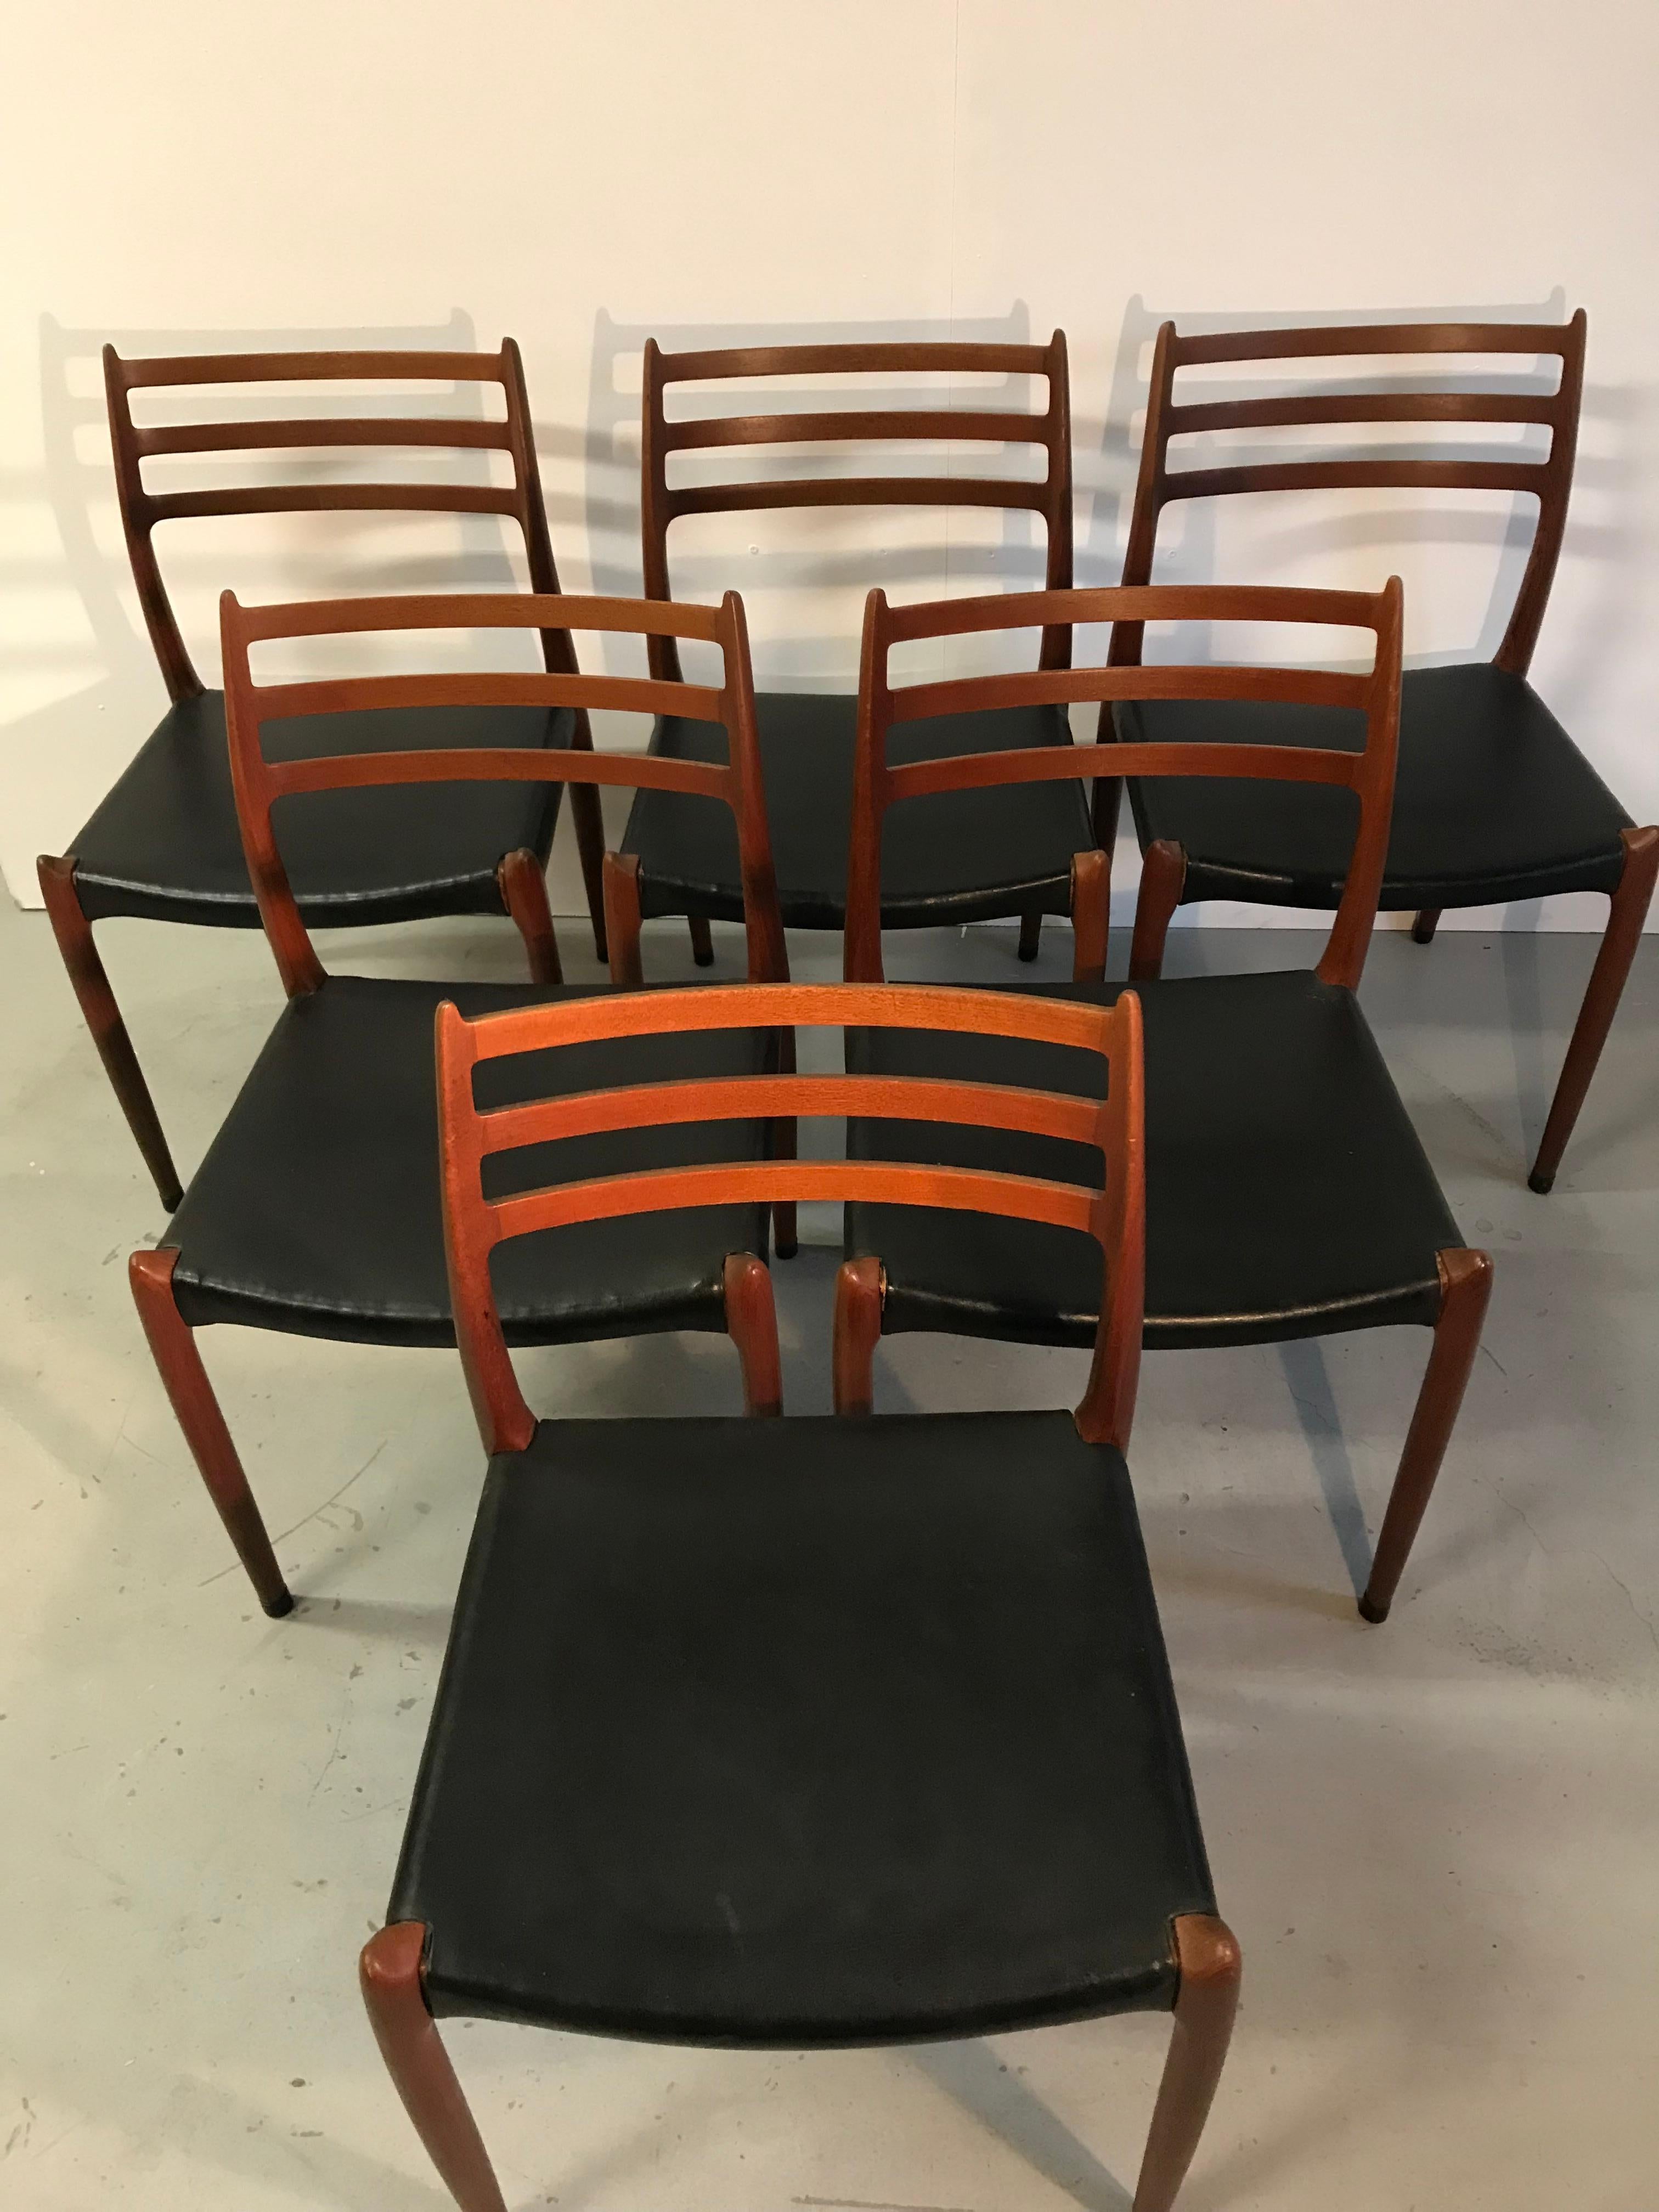 Set of 6 teak dining chairs with black vinyl upholstery model no.78 designed by Niels O.Moller for J.L Moller
The chairs are in good original condition.